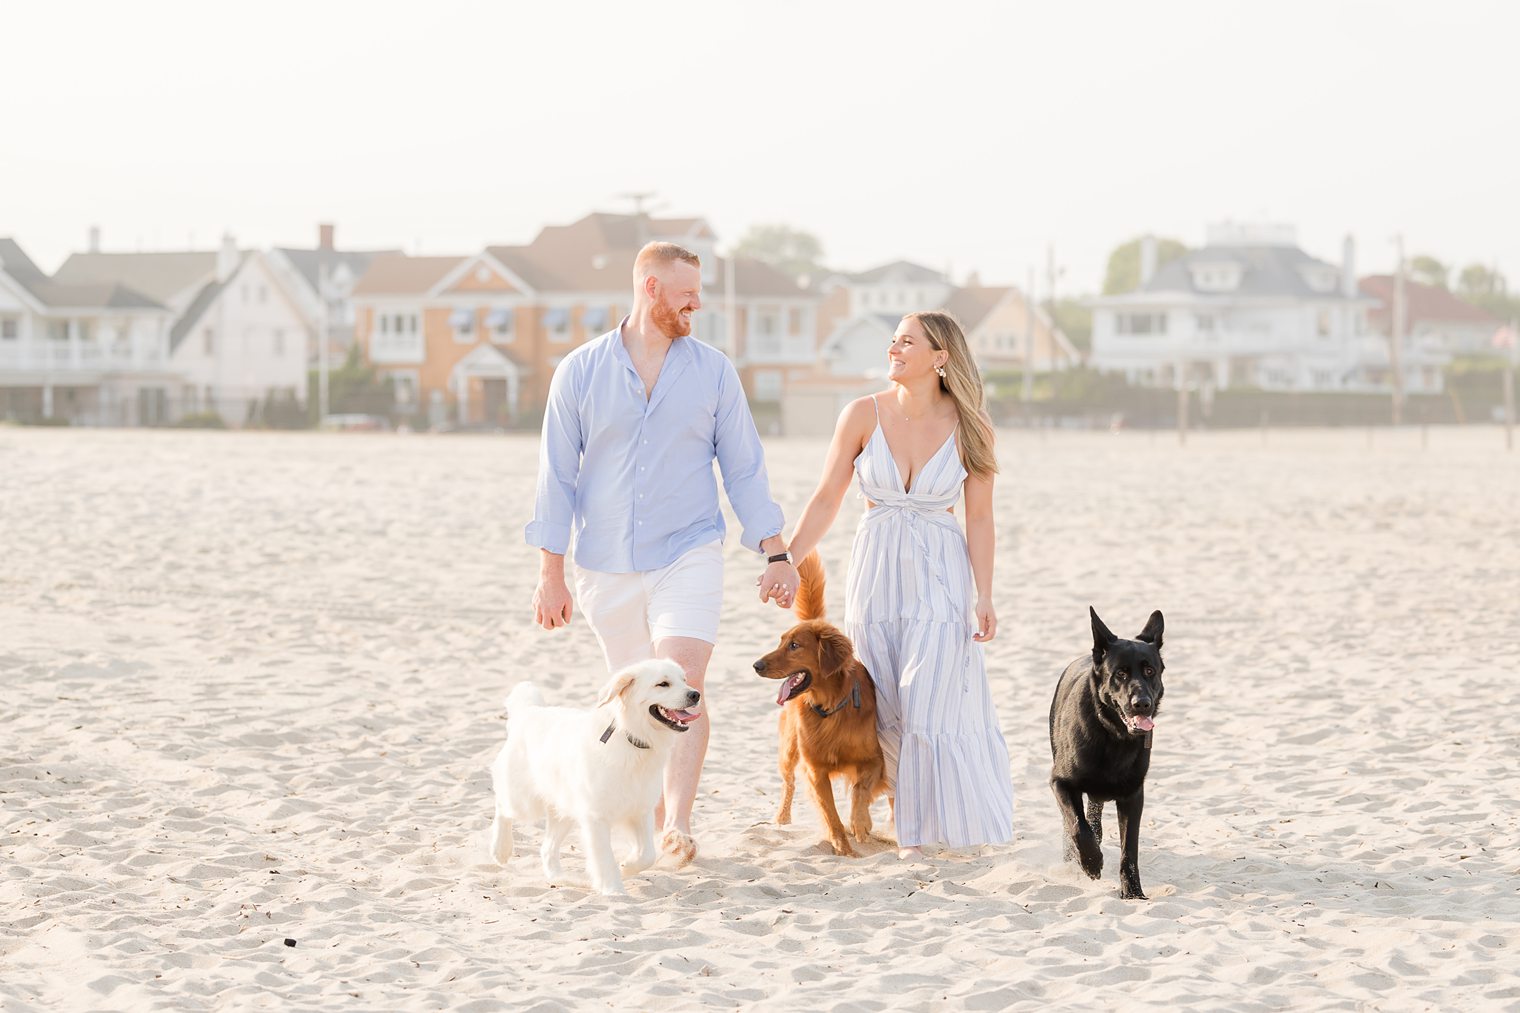 Future Mr and Mrs walking in the beach with their fur babies